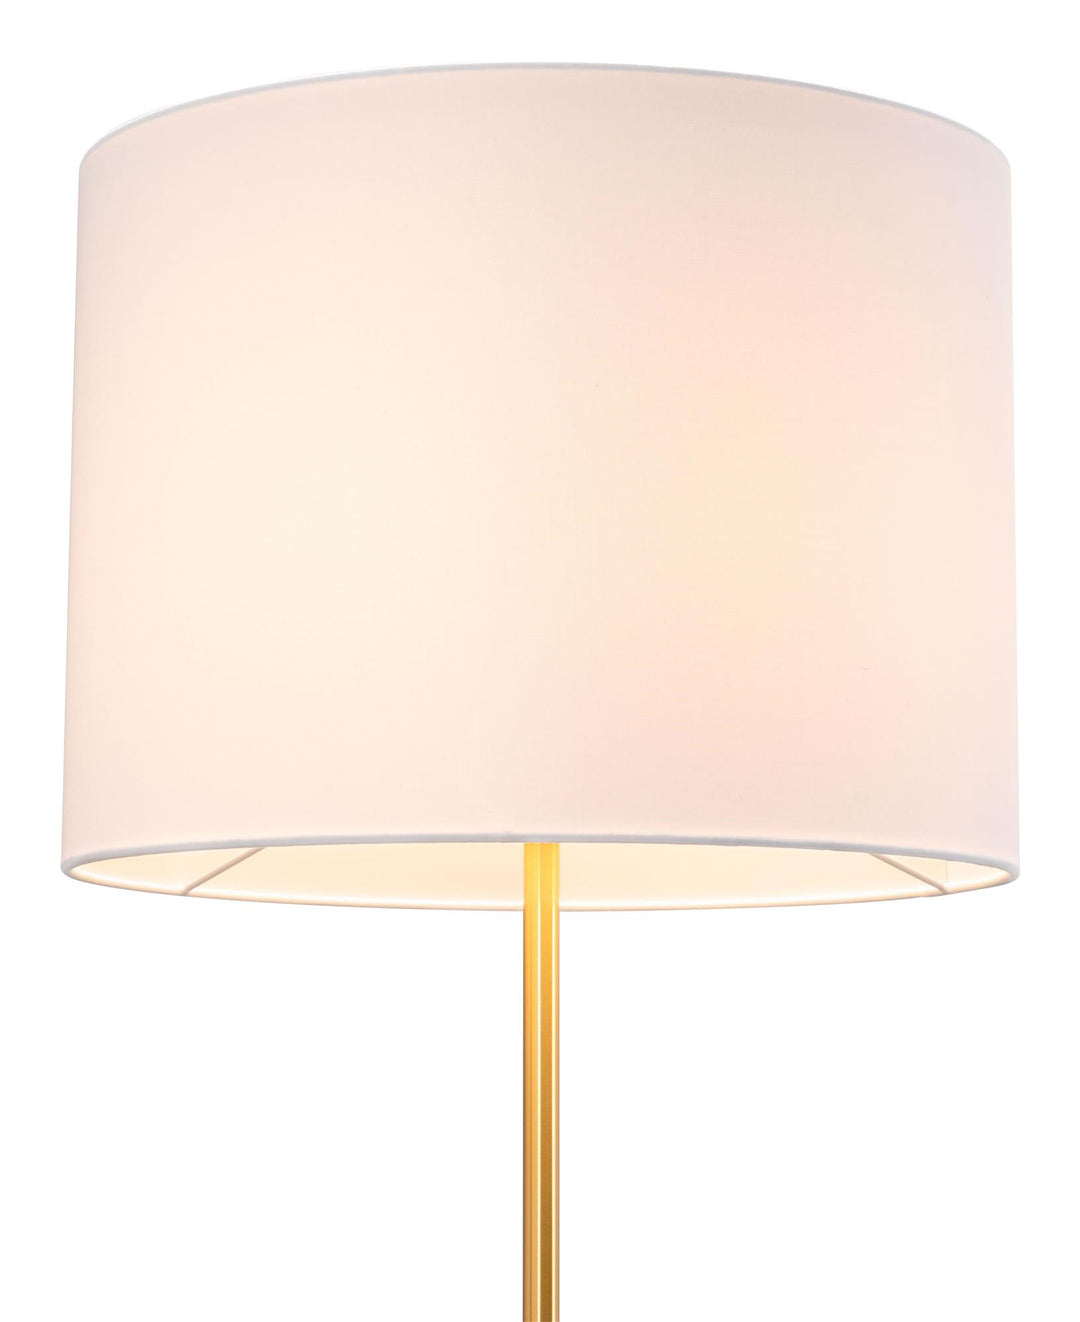 Stylish floor lamp with foot switch mechanism -  N/A